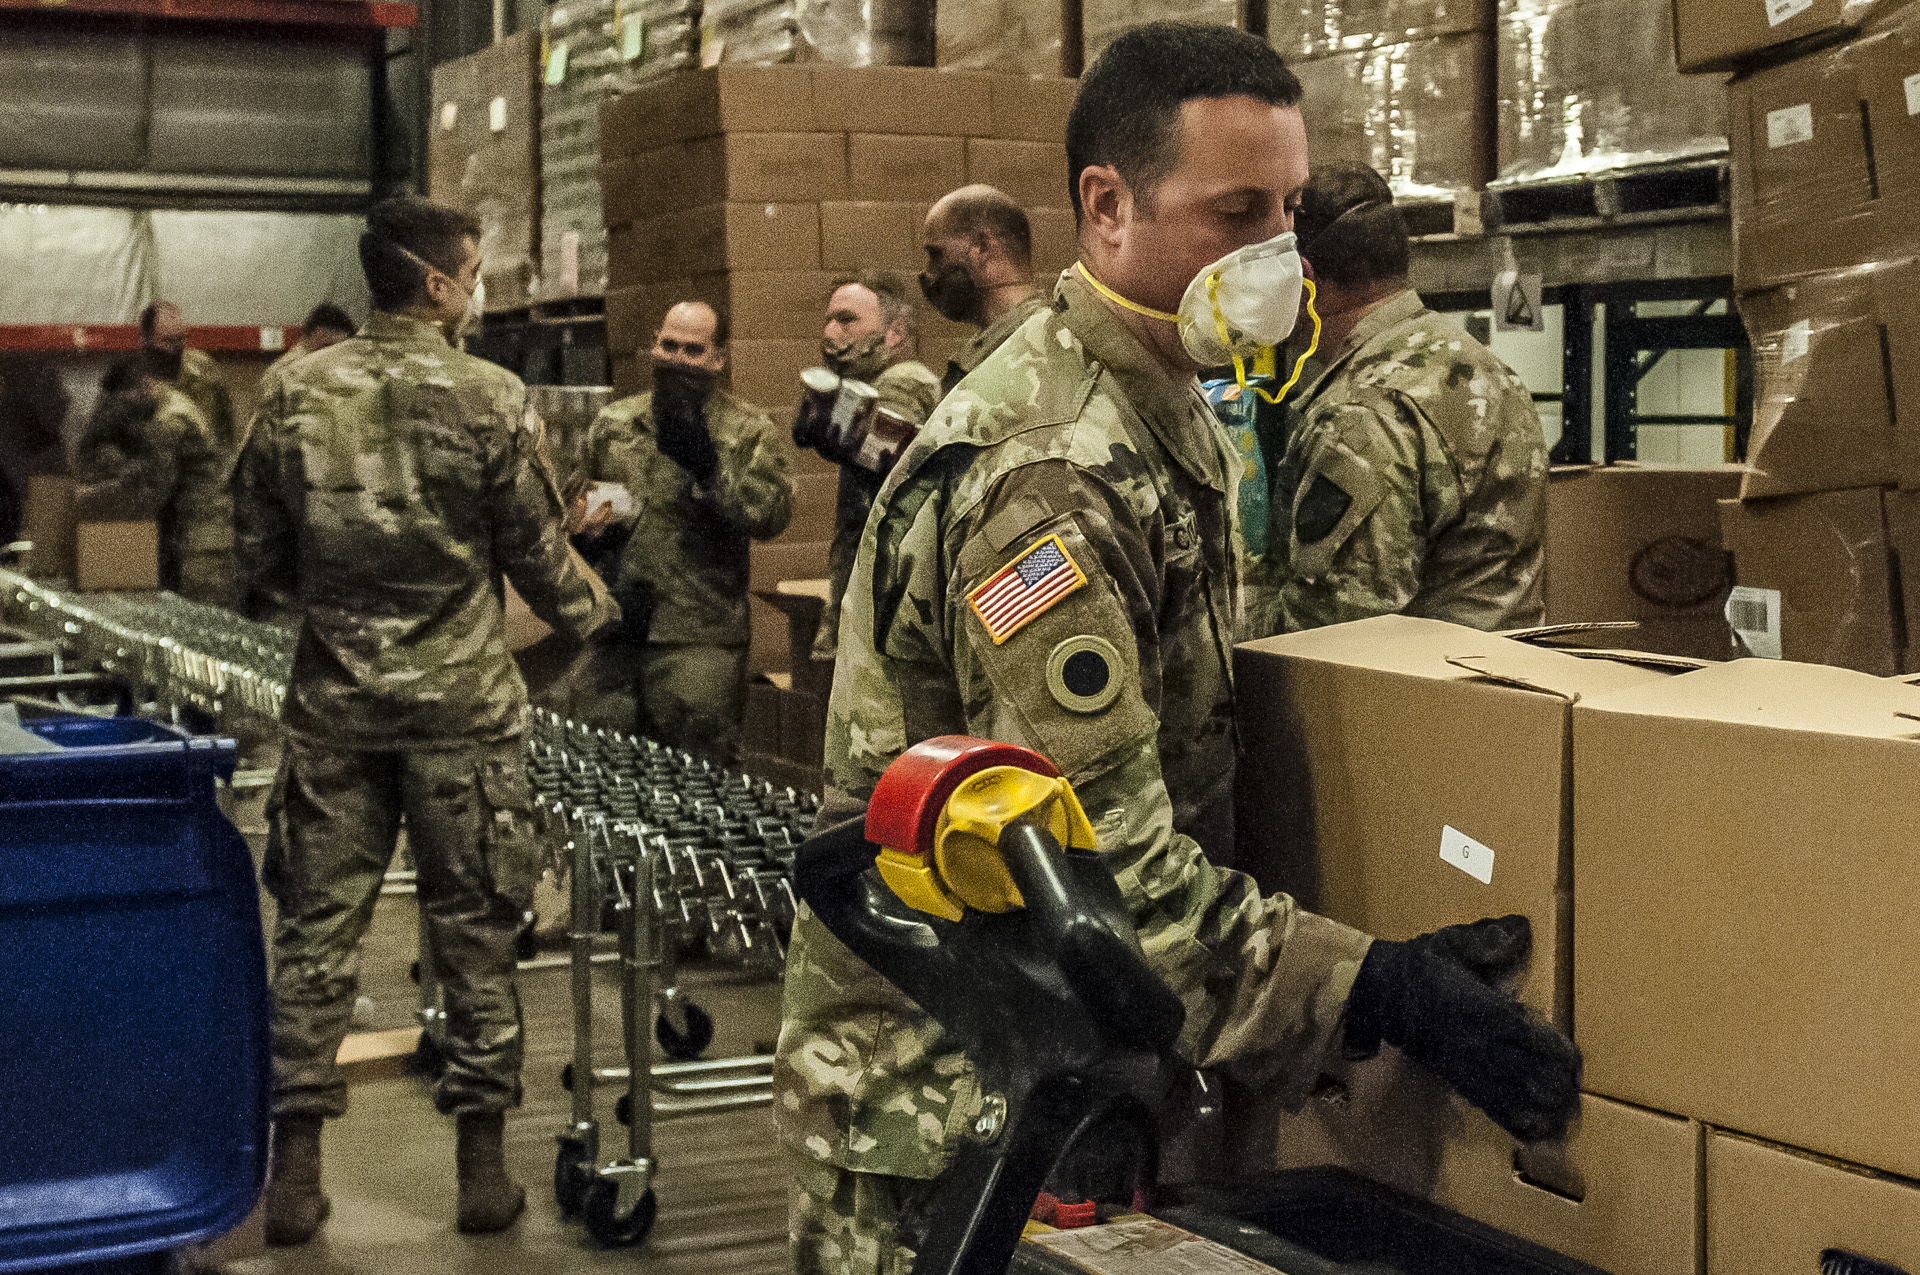 Soldiers pack boxes in assembly line.